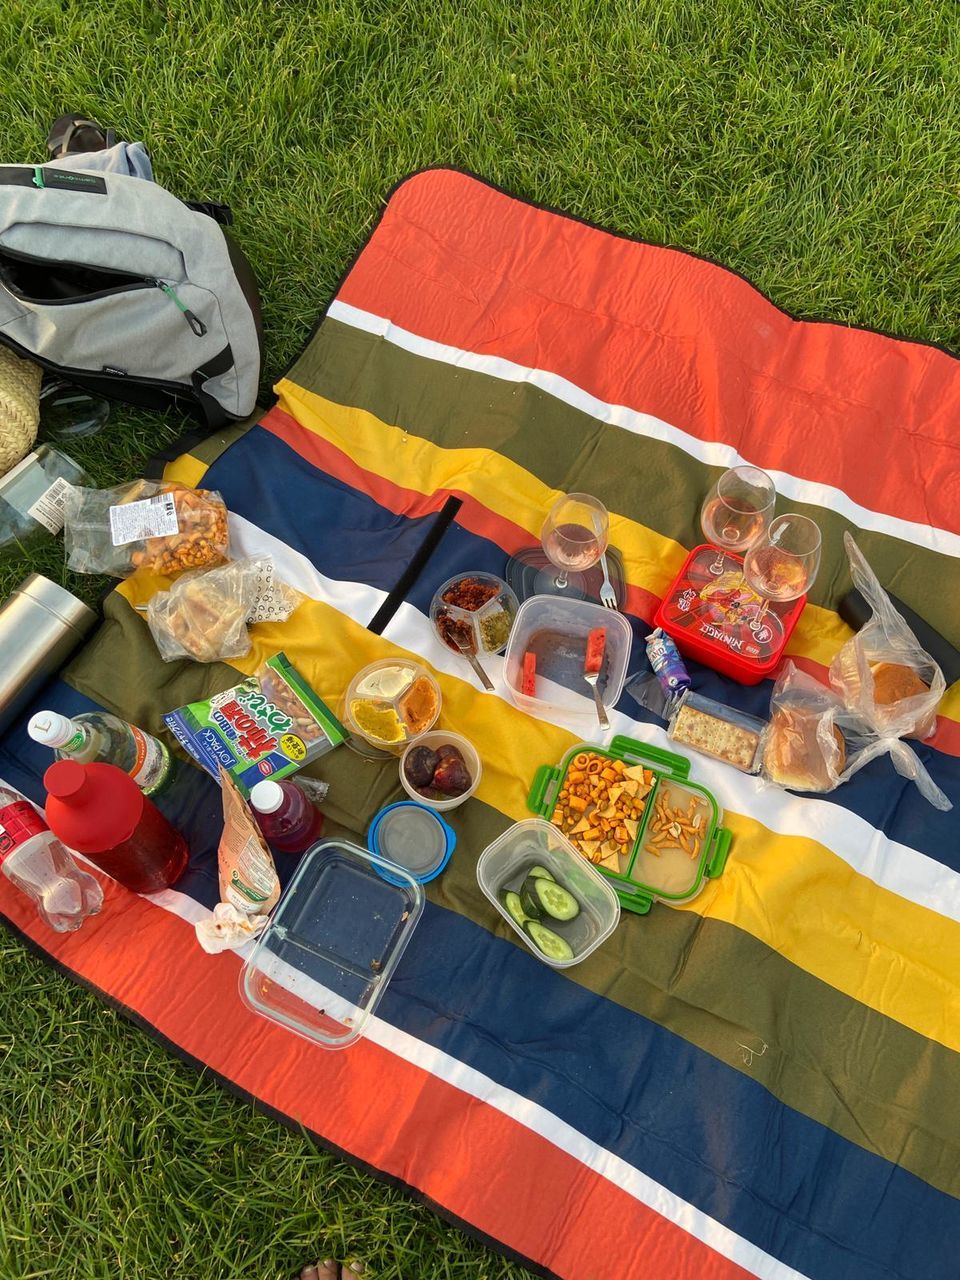 picnic, grass, food and drink, high angle view, food, picnic blanket, healthy eating, plant, day, nature, summer, drink, no people, blanket, land, outdoors, vegetable, wellbeing, fruit, meal, lawn, multi colored, freshness, table, leisure activity, field, bread